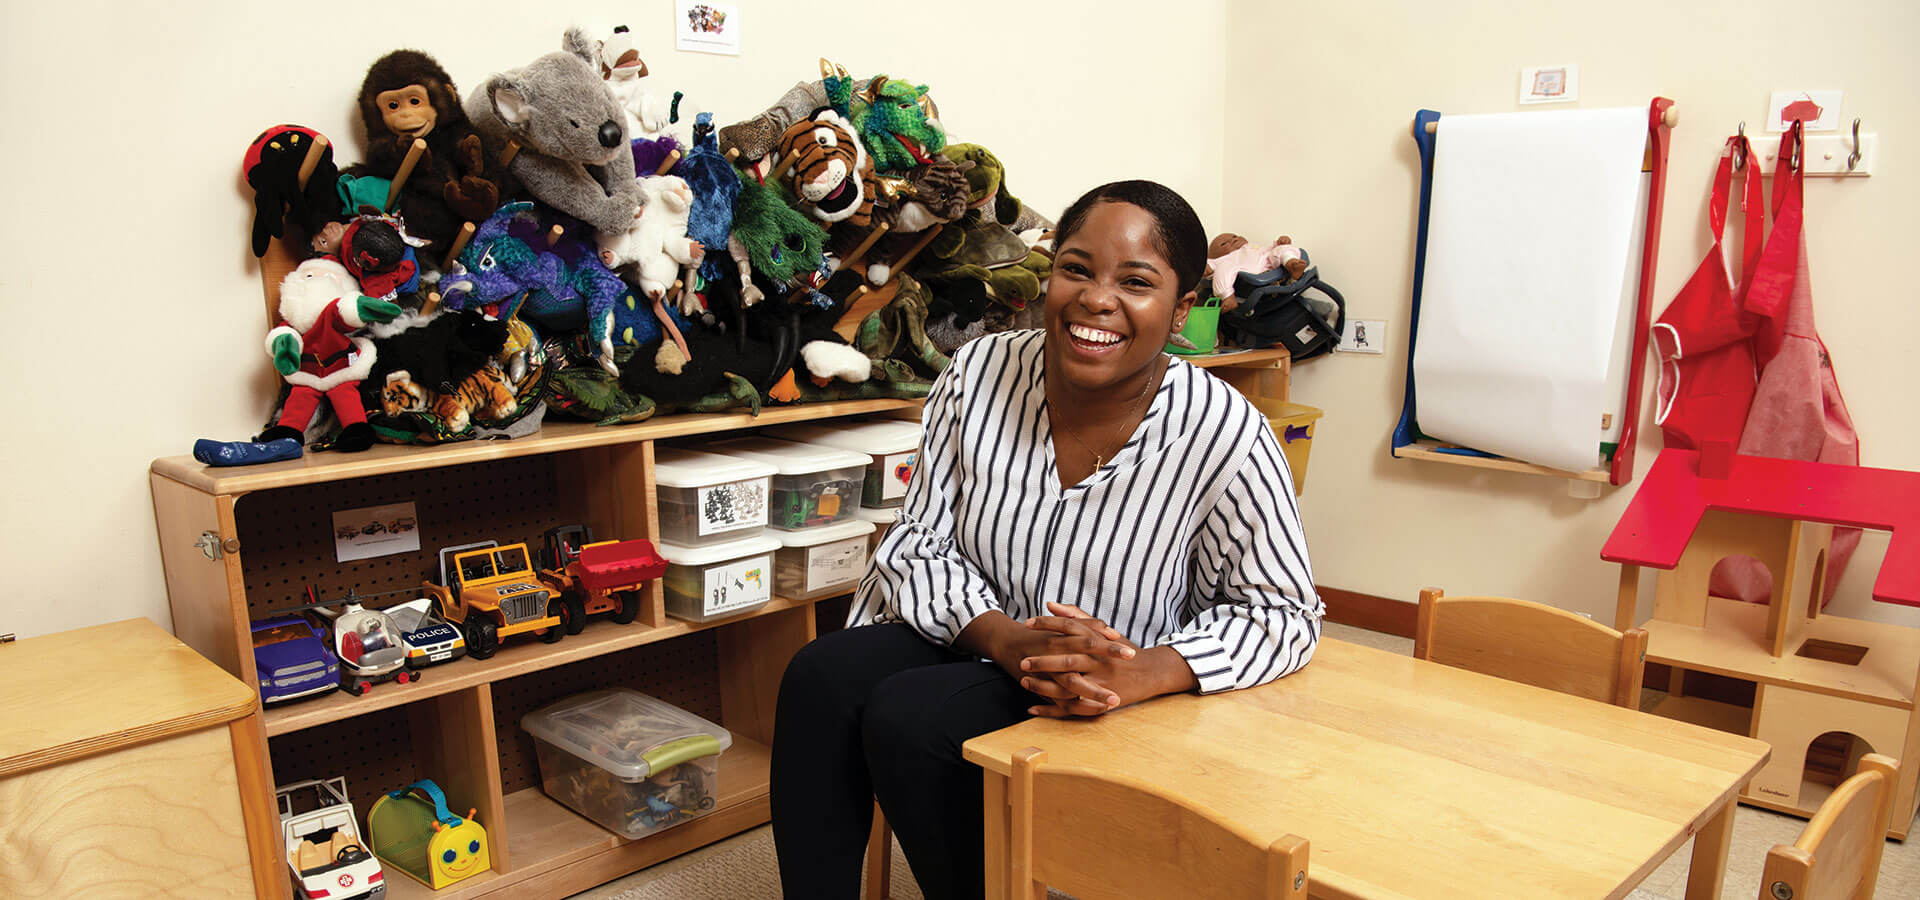 counseling student sits at a child-sized table surrounded by toys and stuffed animals